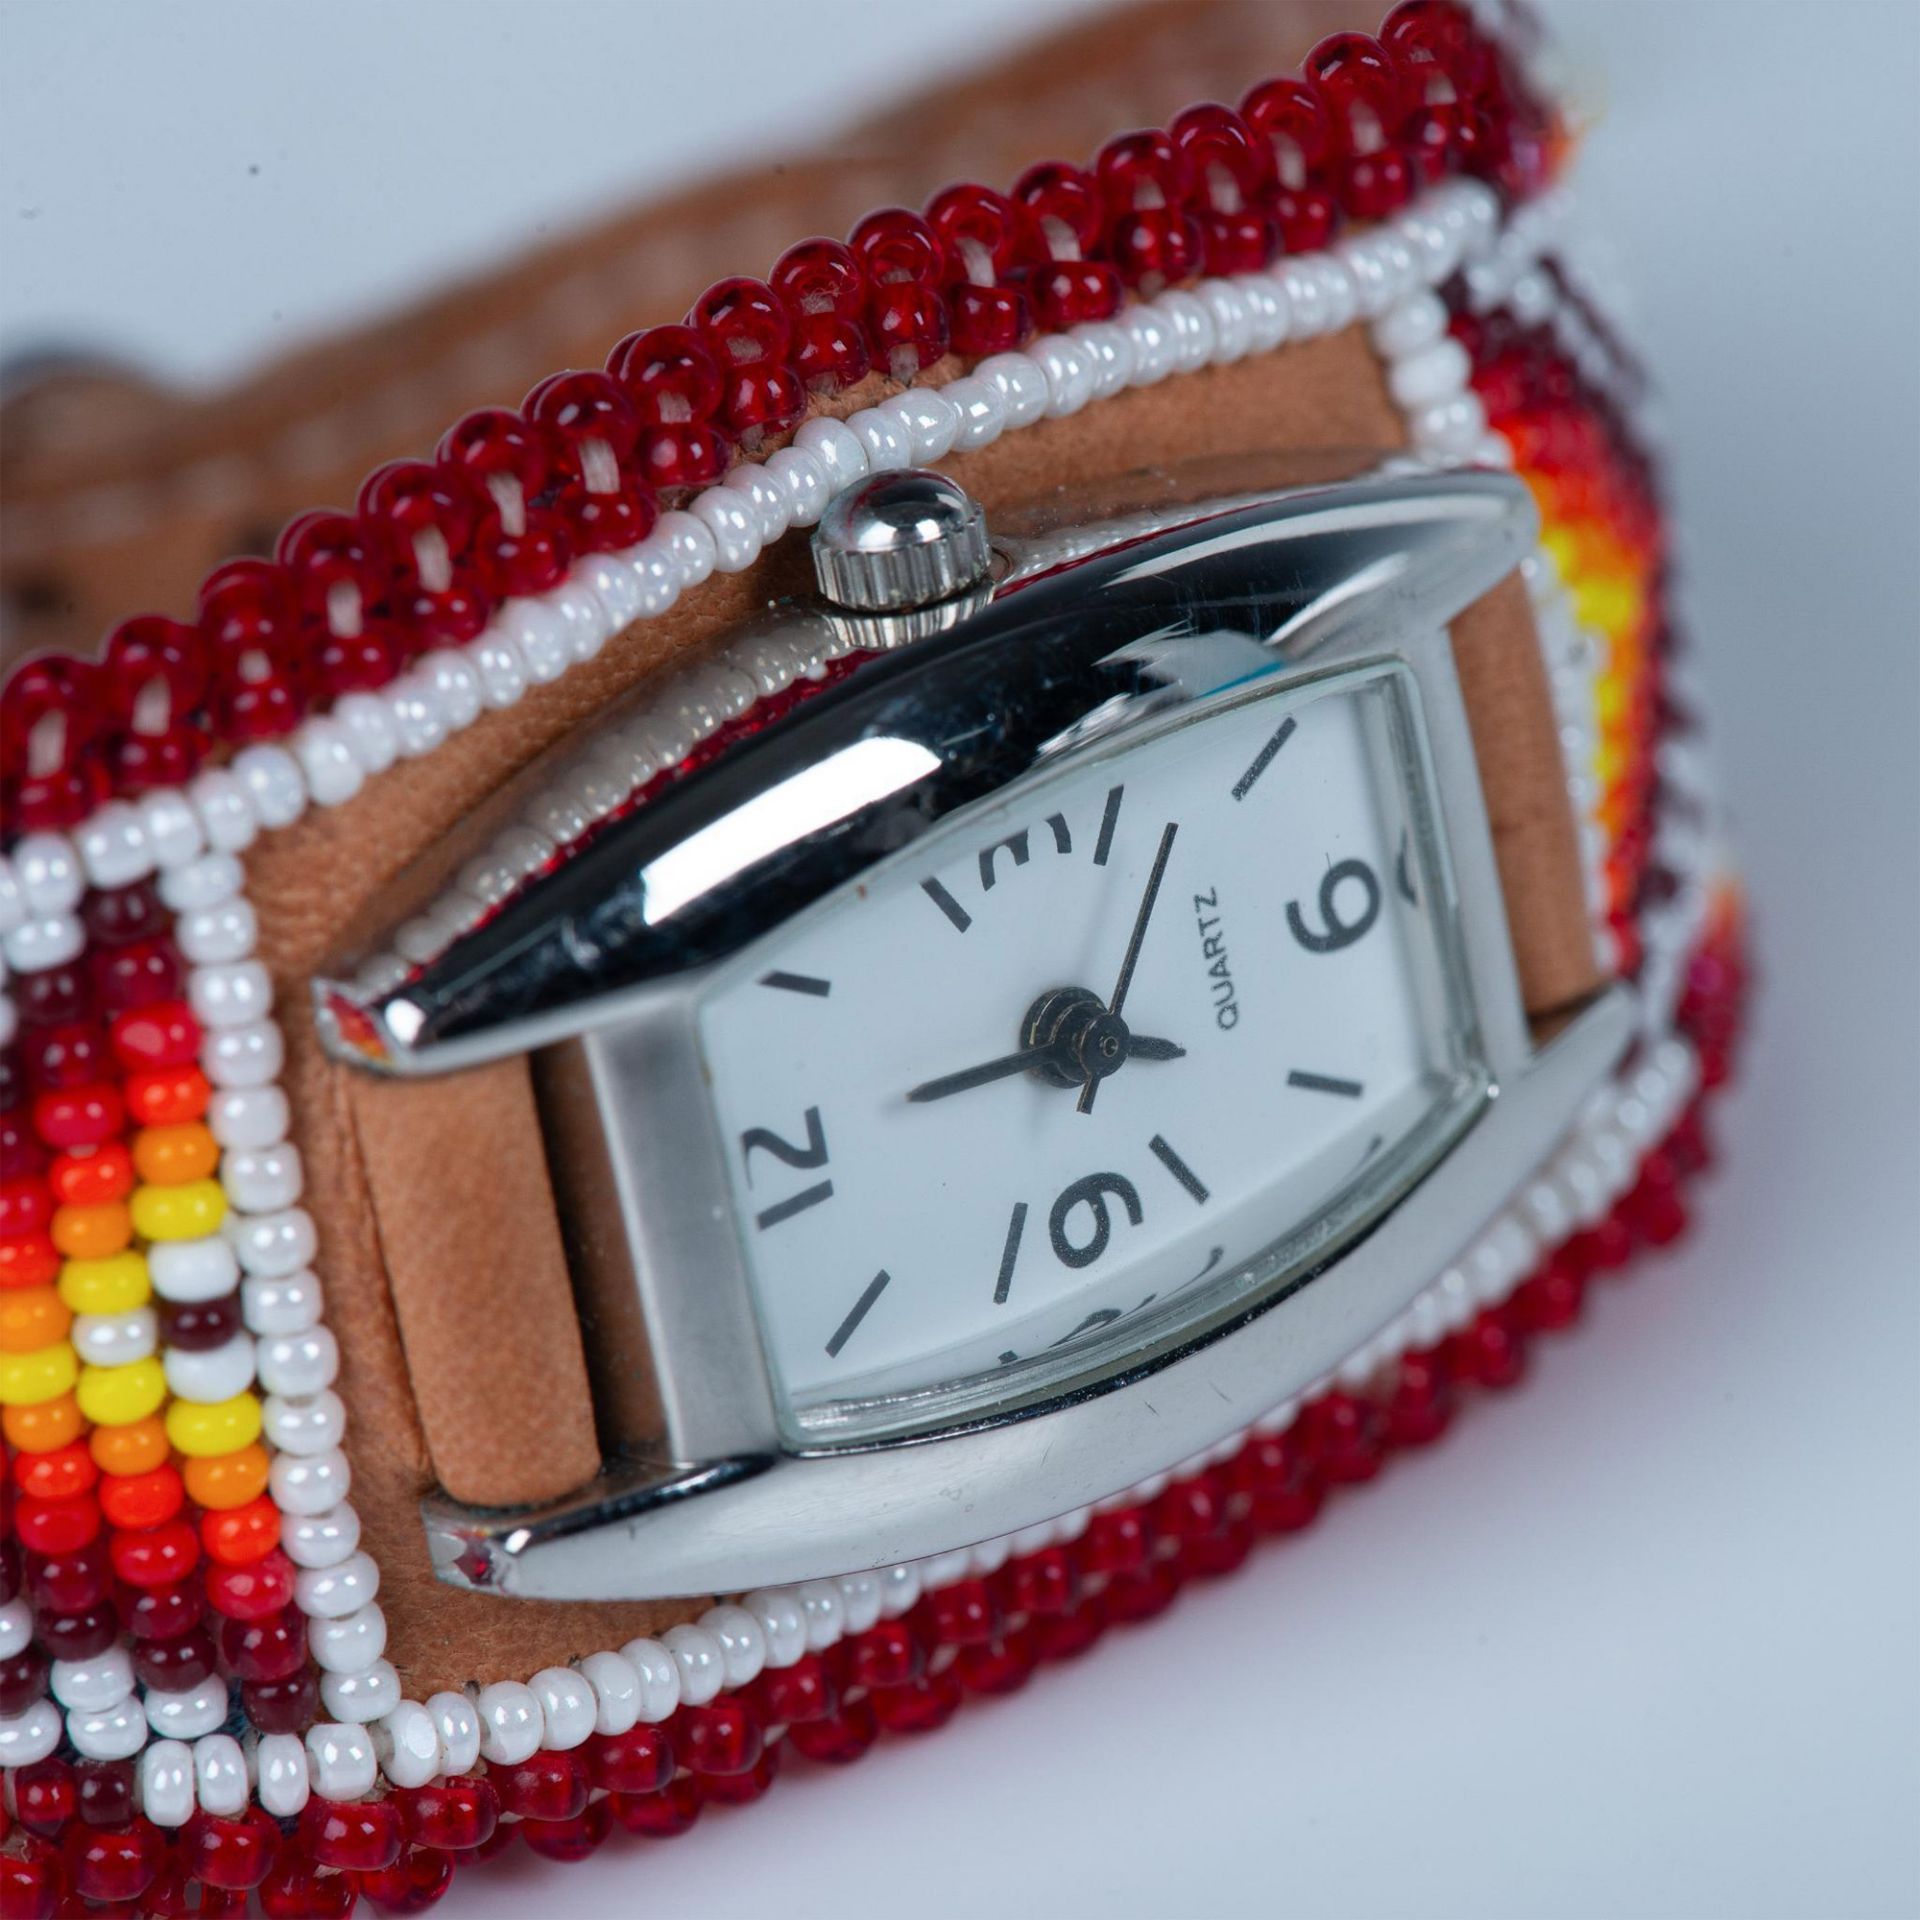 Native American Hand Beaded Band Watch - Image 6 of 6